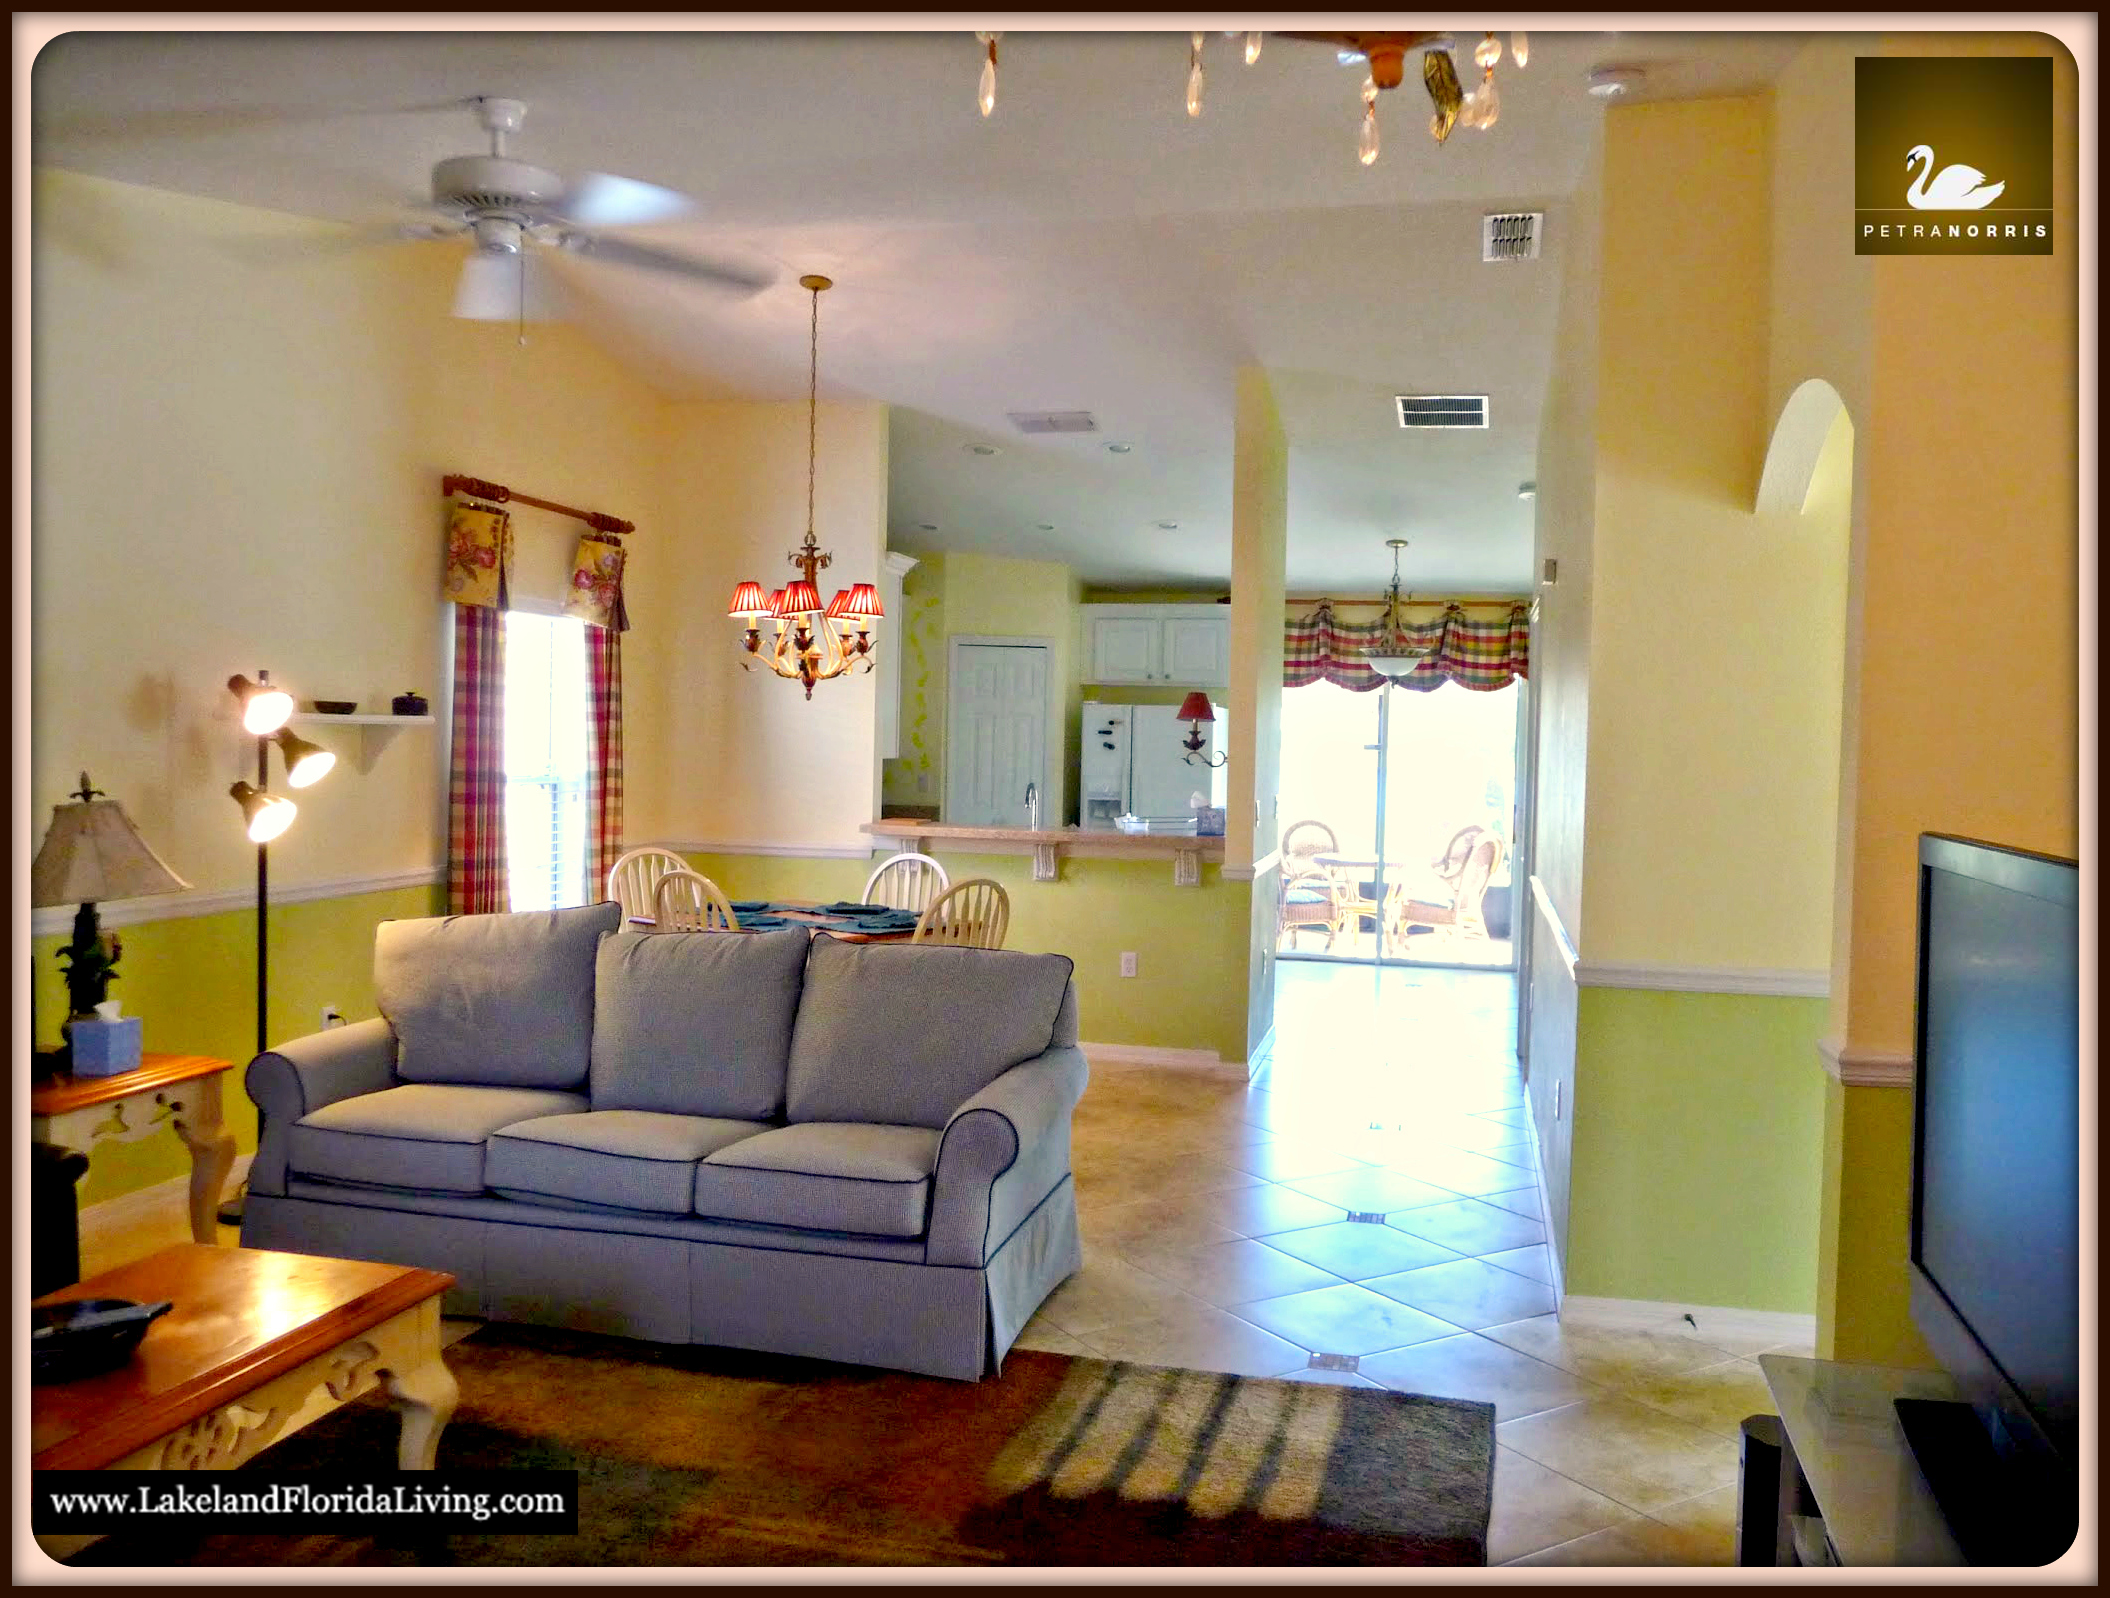 Home for Sale in Solivita Community FL - 213 Grand Canal Dr - 003 Living Room 1